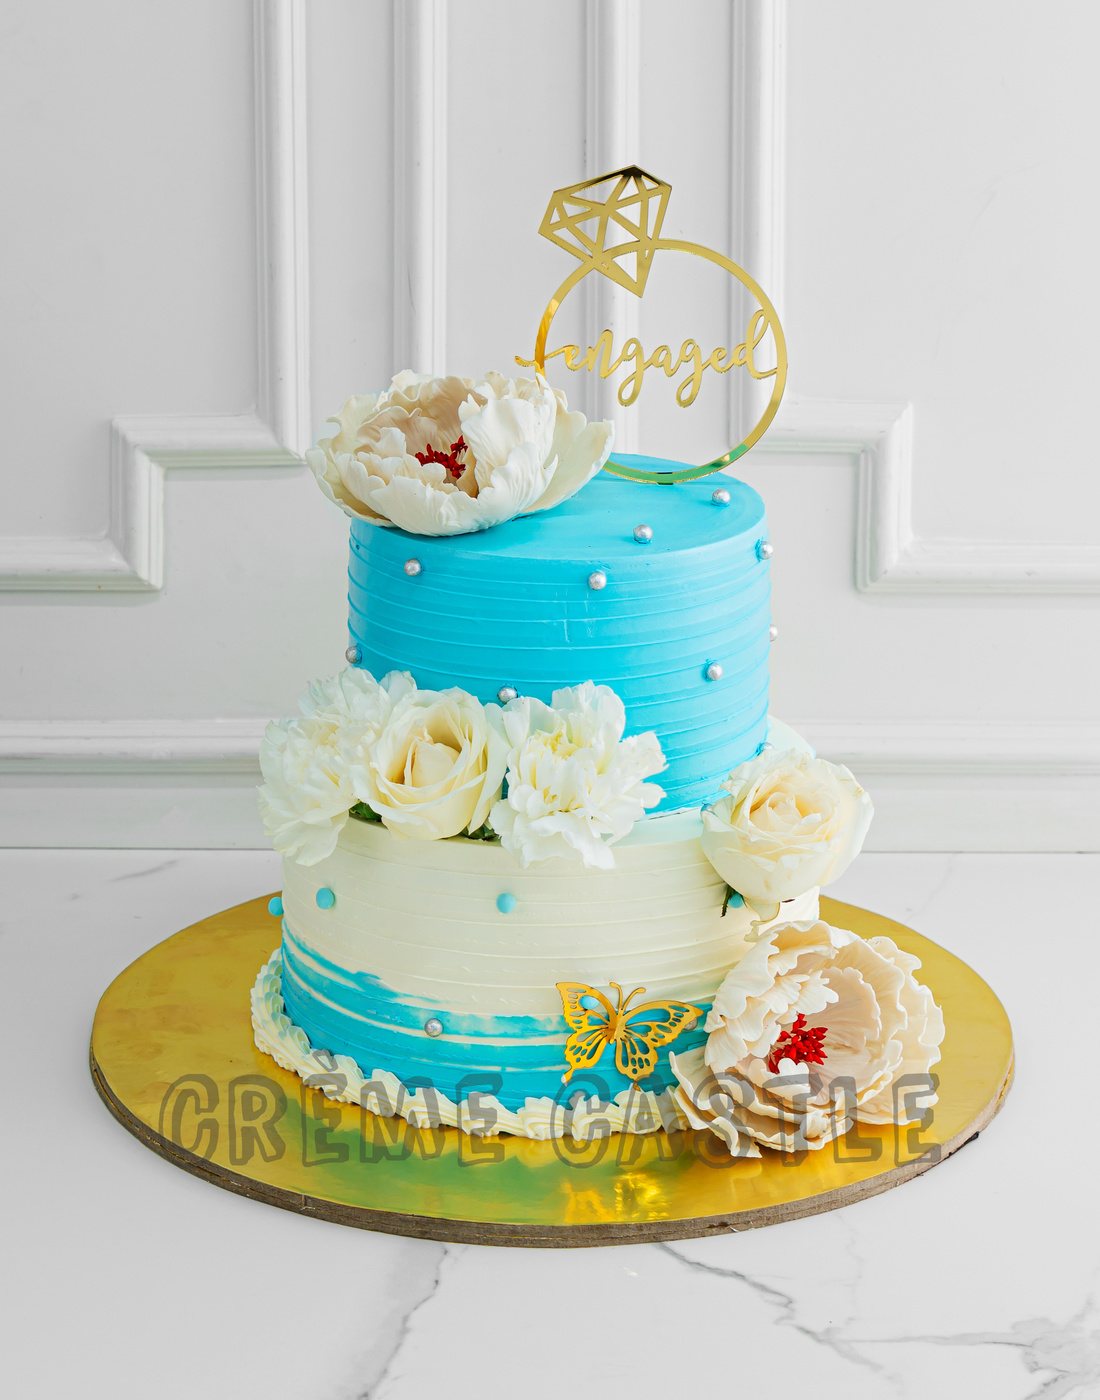 Was asked to make a teal/gold cake. Lemon cake and cream cheese filling :  r/cakedecorating